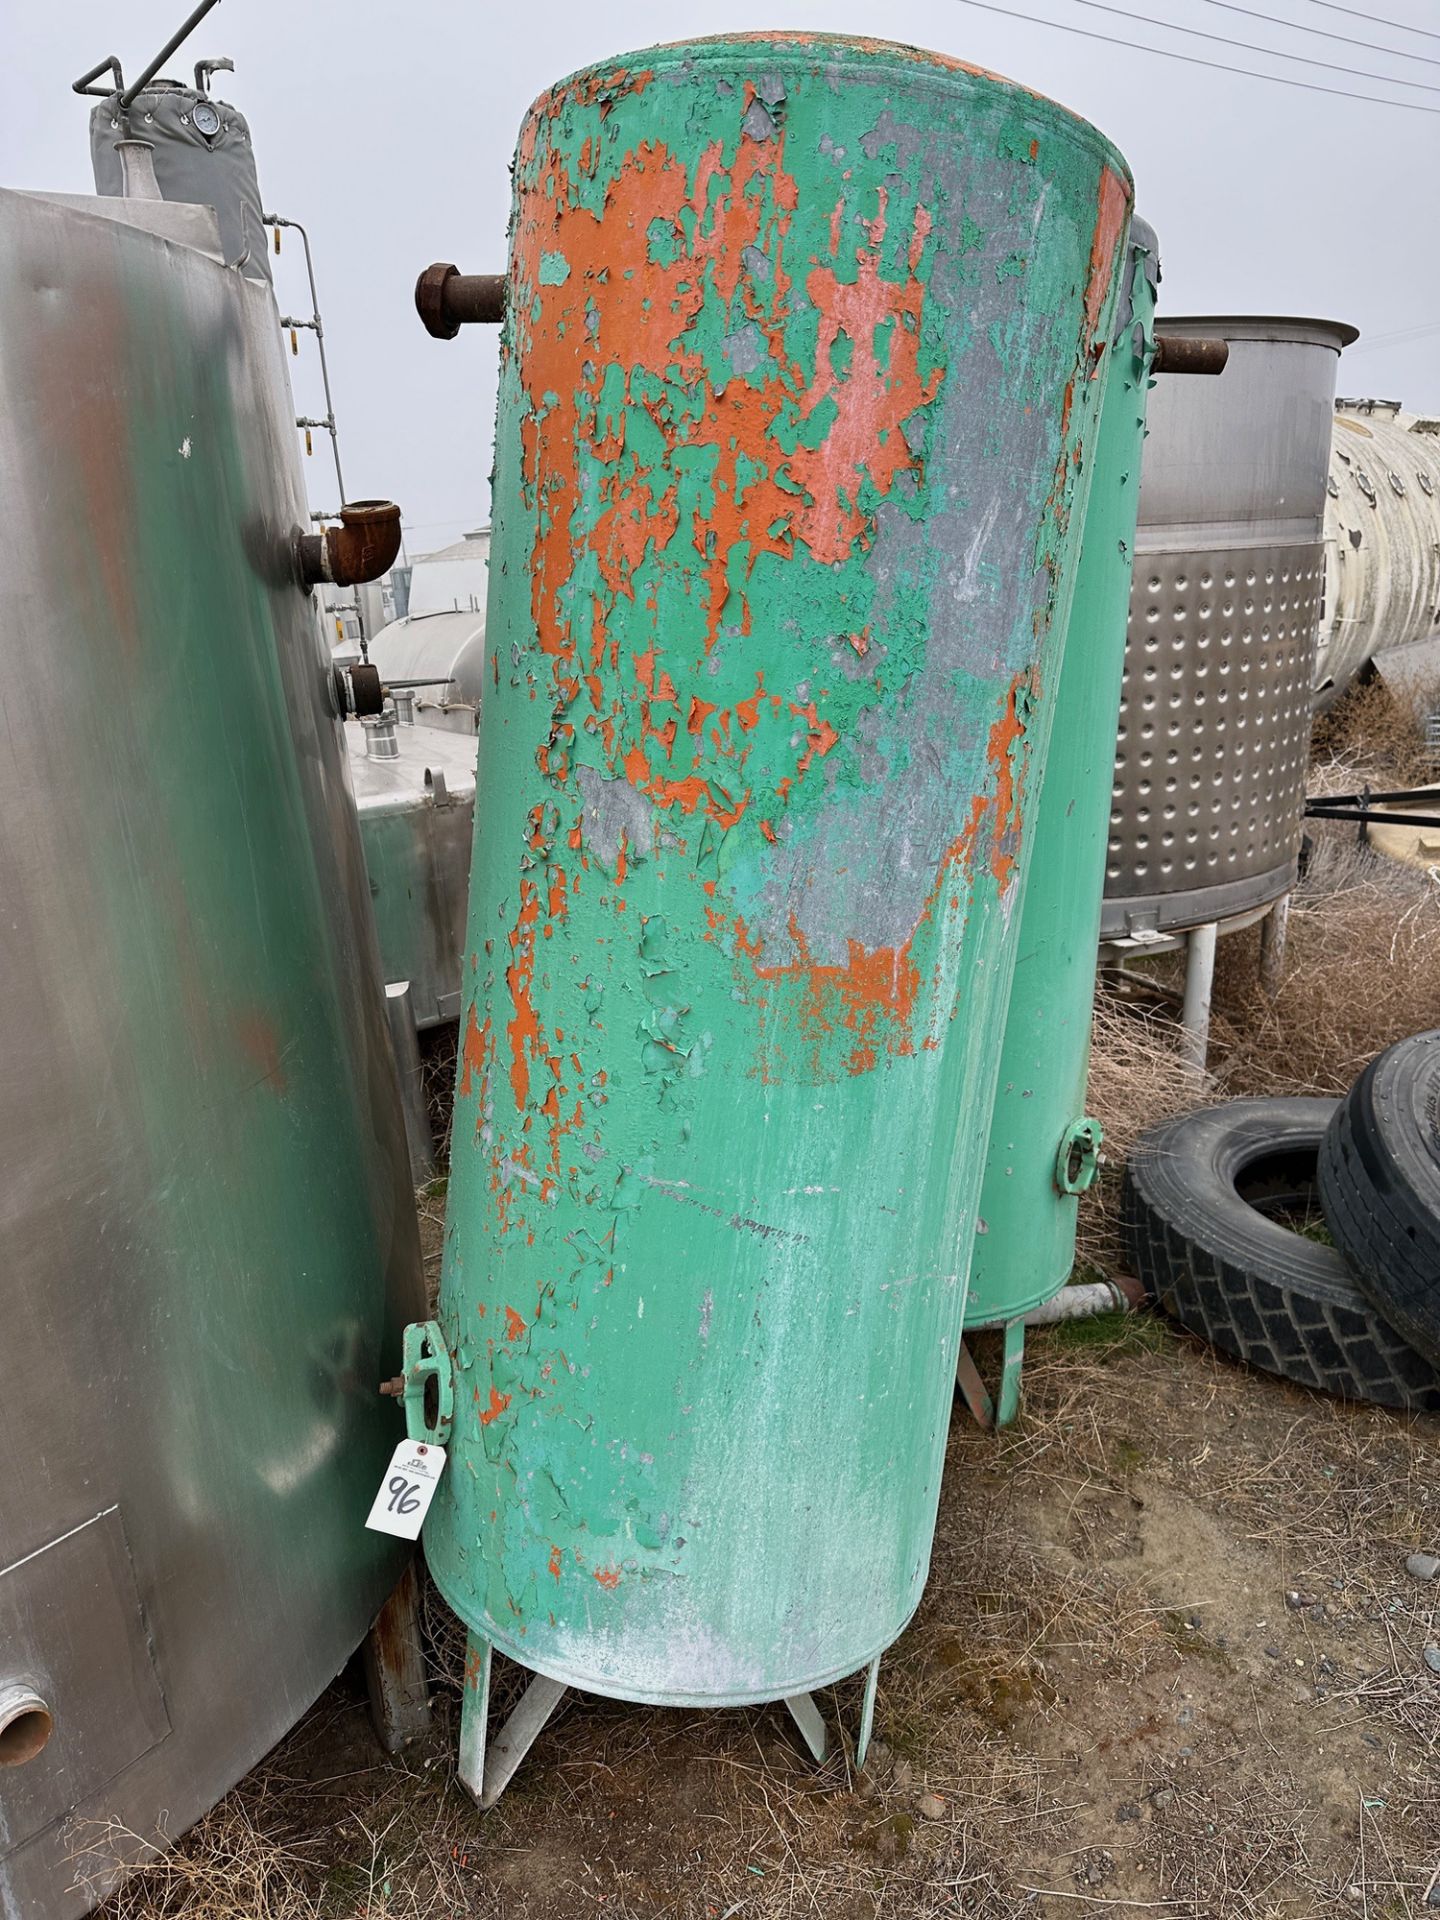 Utility Tank (Approx. 3' Diameter and 7'6" O.H.) | Rig Fee $150